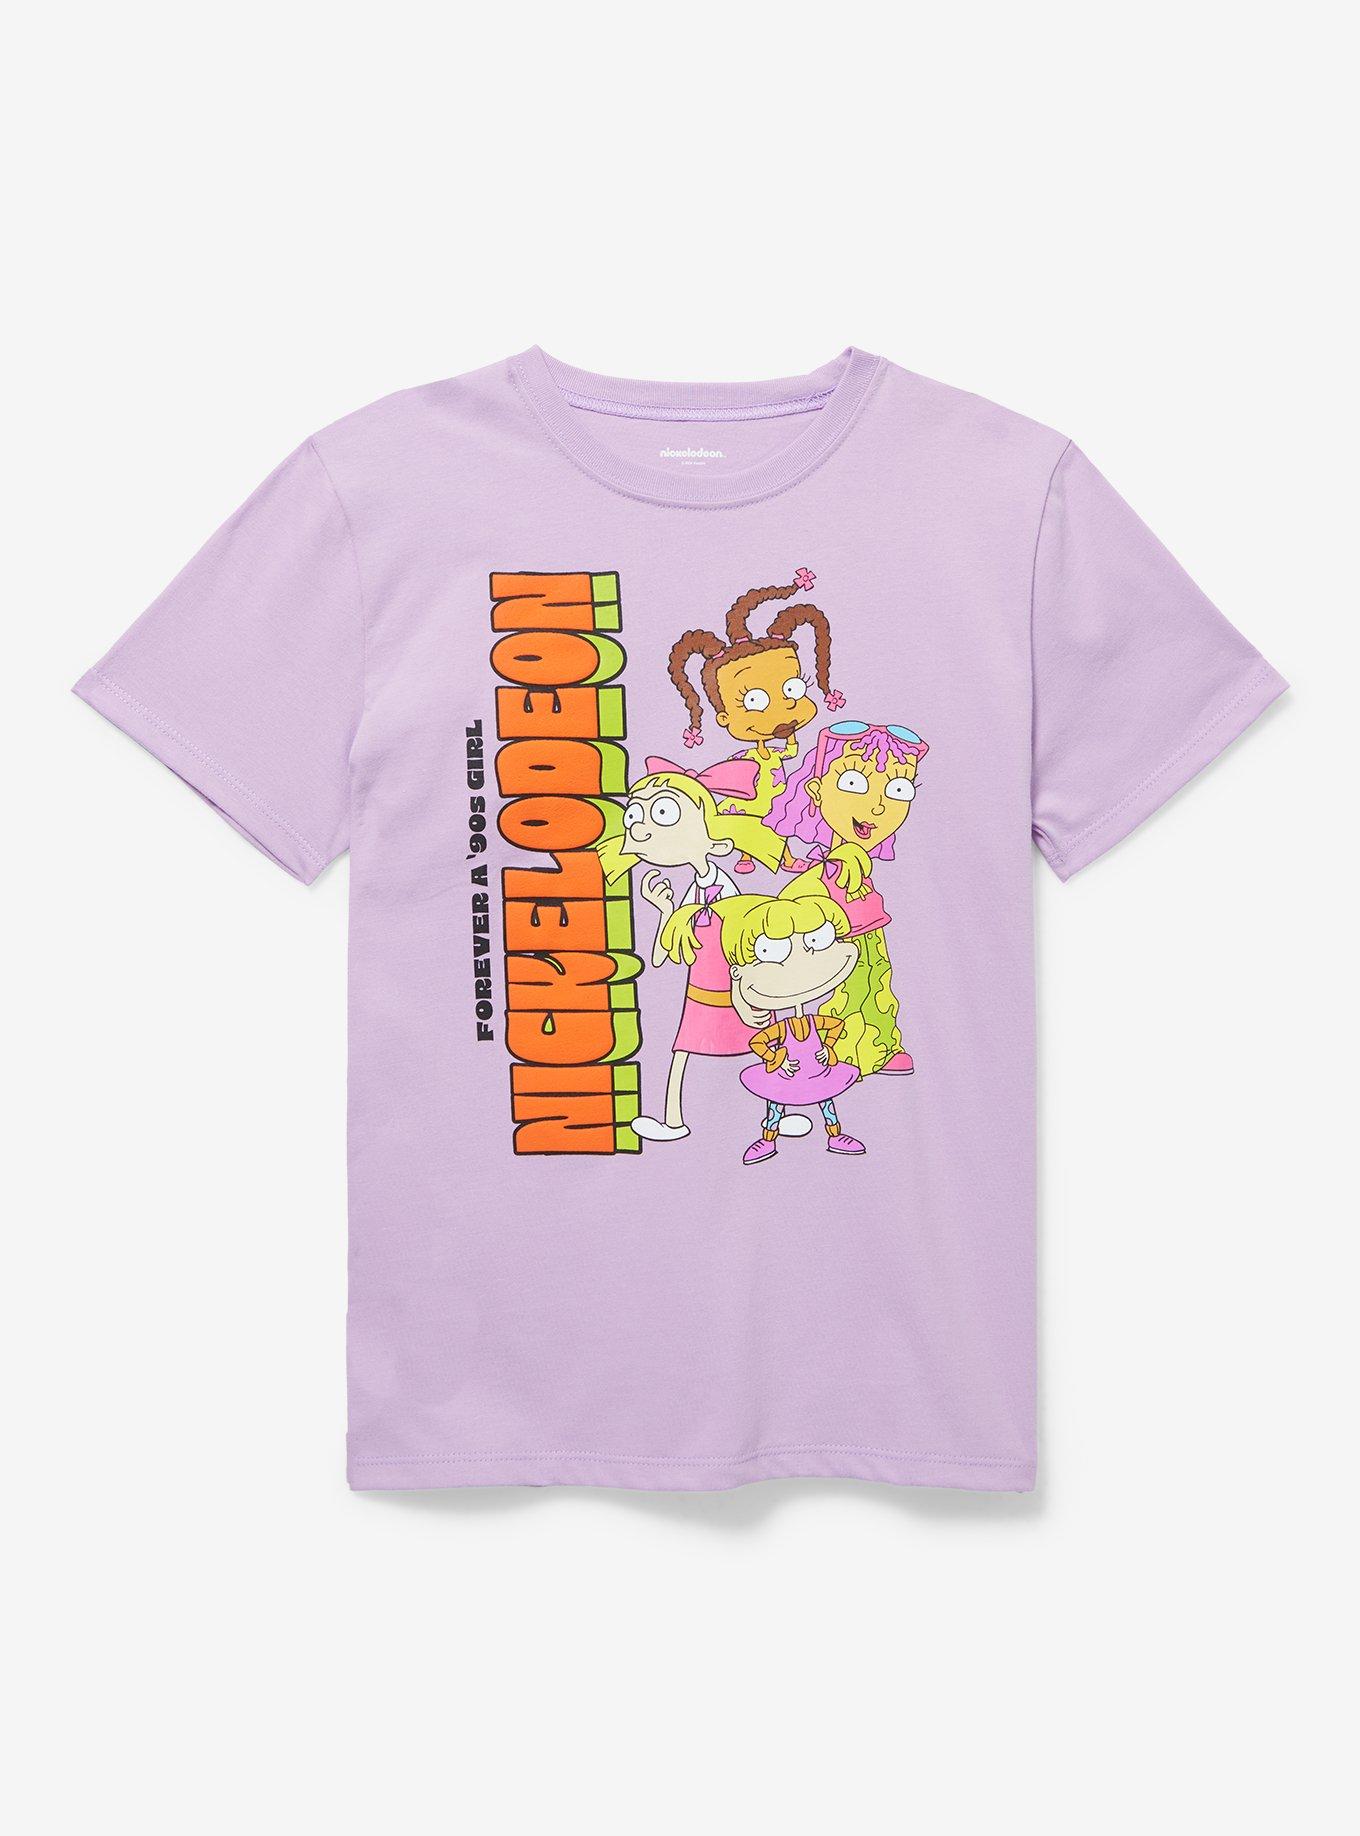 Nickelodeon Cartoon Girls Group Portrait Youth T-Shirt - BoxLunch Exclusive